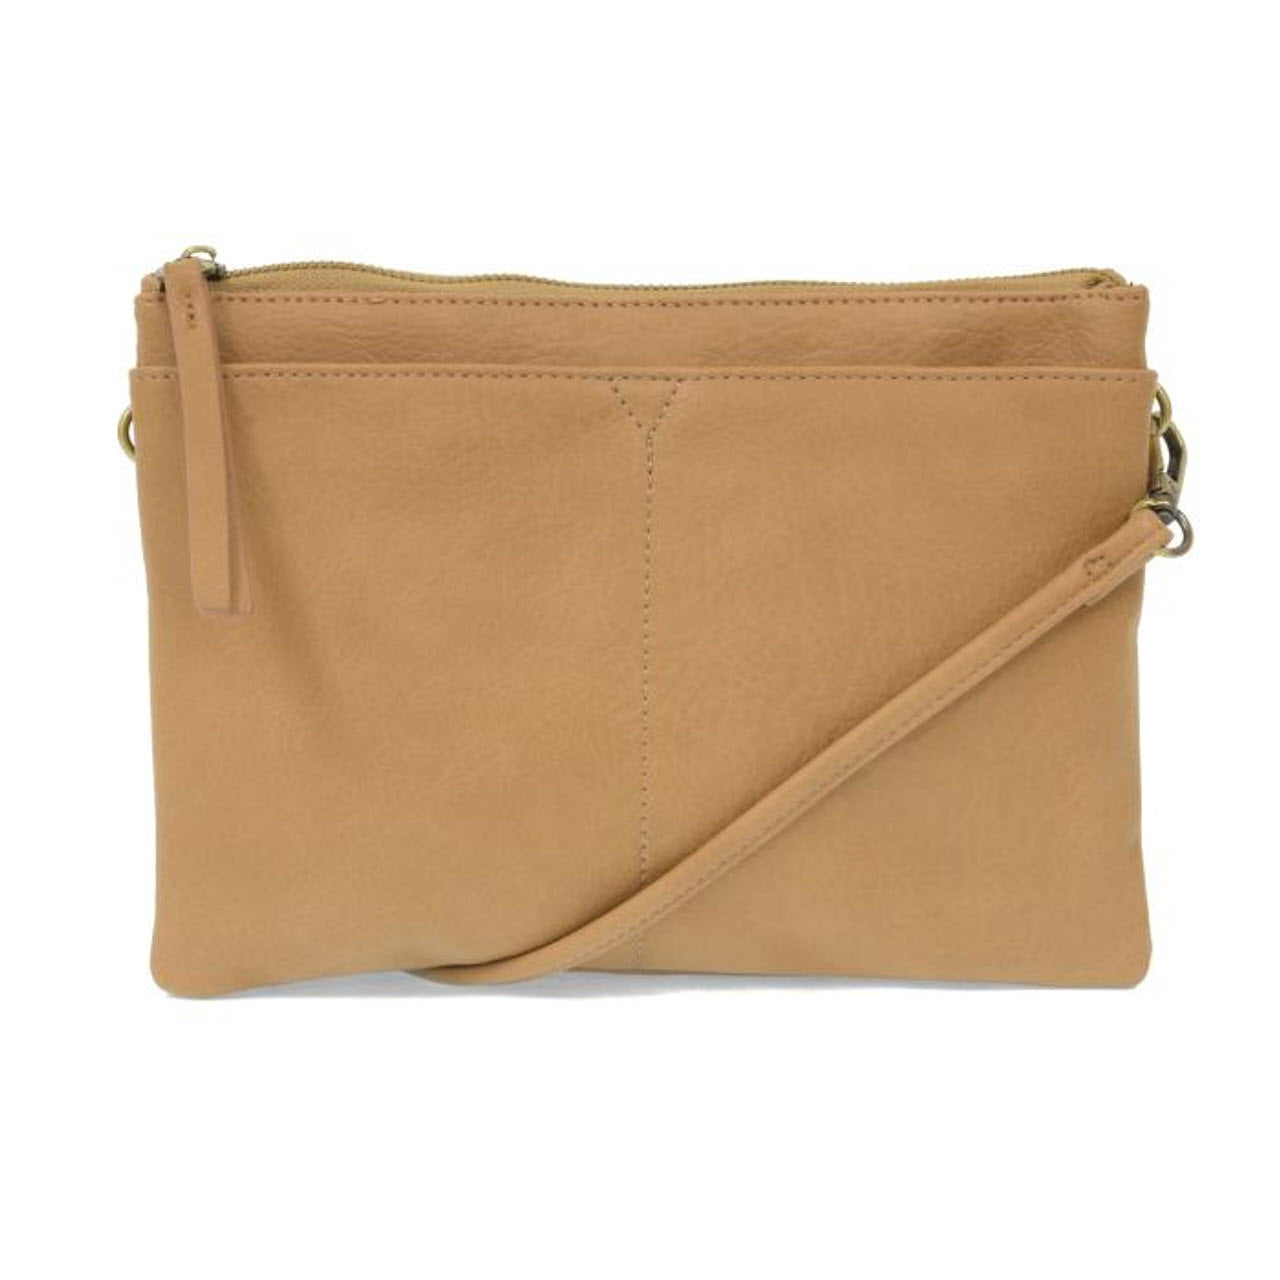 JOY SUSAN GIA MEDIUM MULTI POCKET BAG CAMEL by Joy Susan, with separate compartments, a front zipper, and an adjustable strap, isolated on a white background.